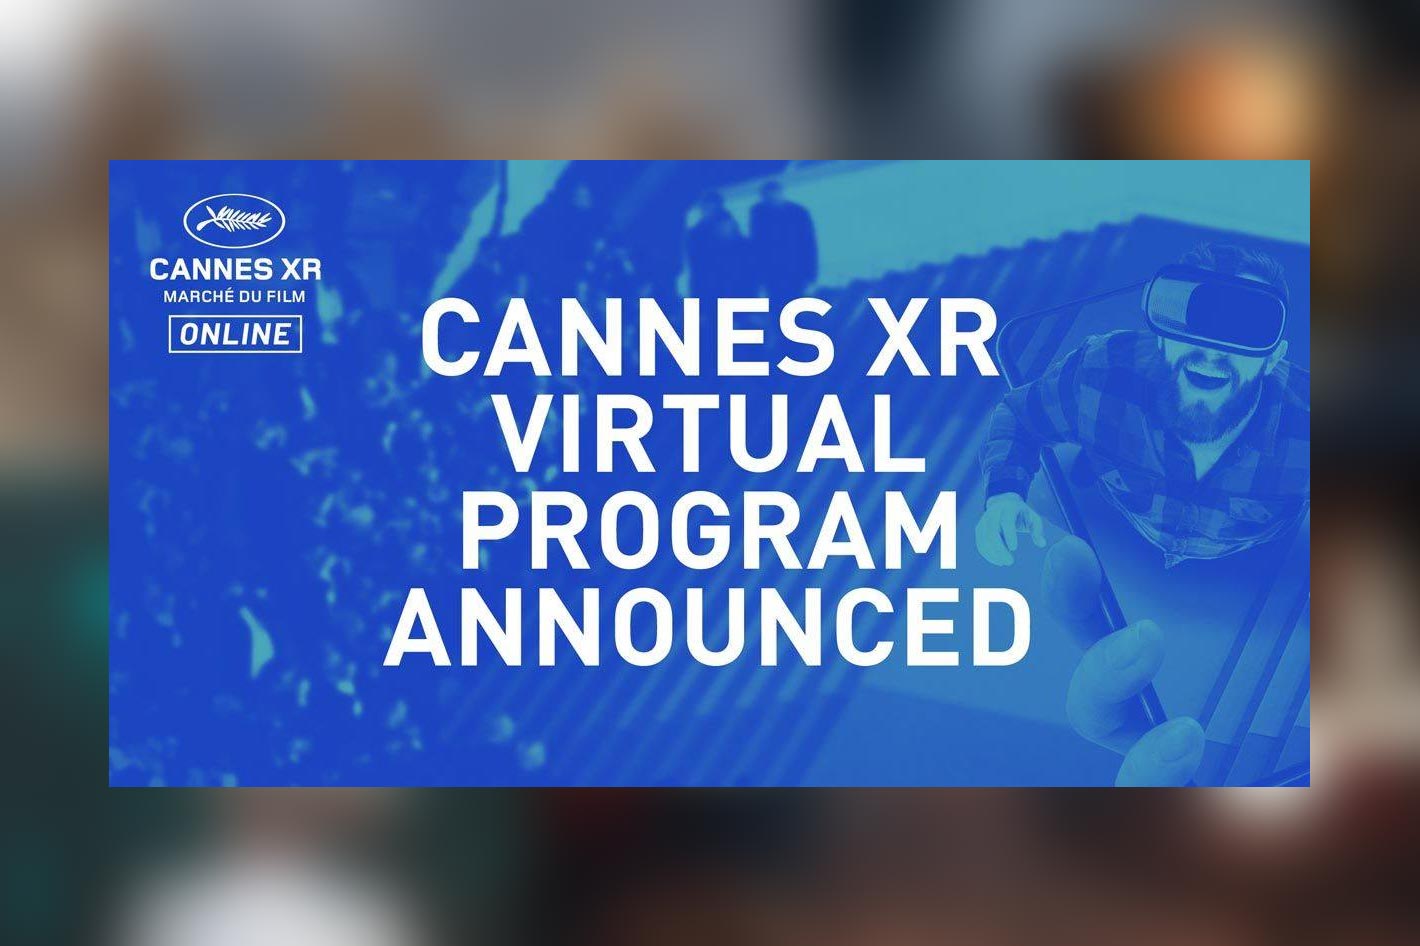 55 XR works presented at the first Cannes XR Virtual